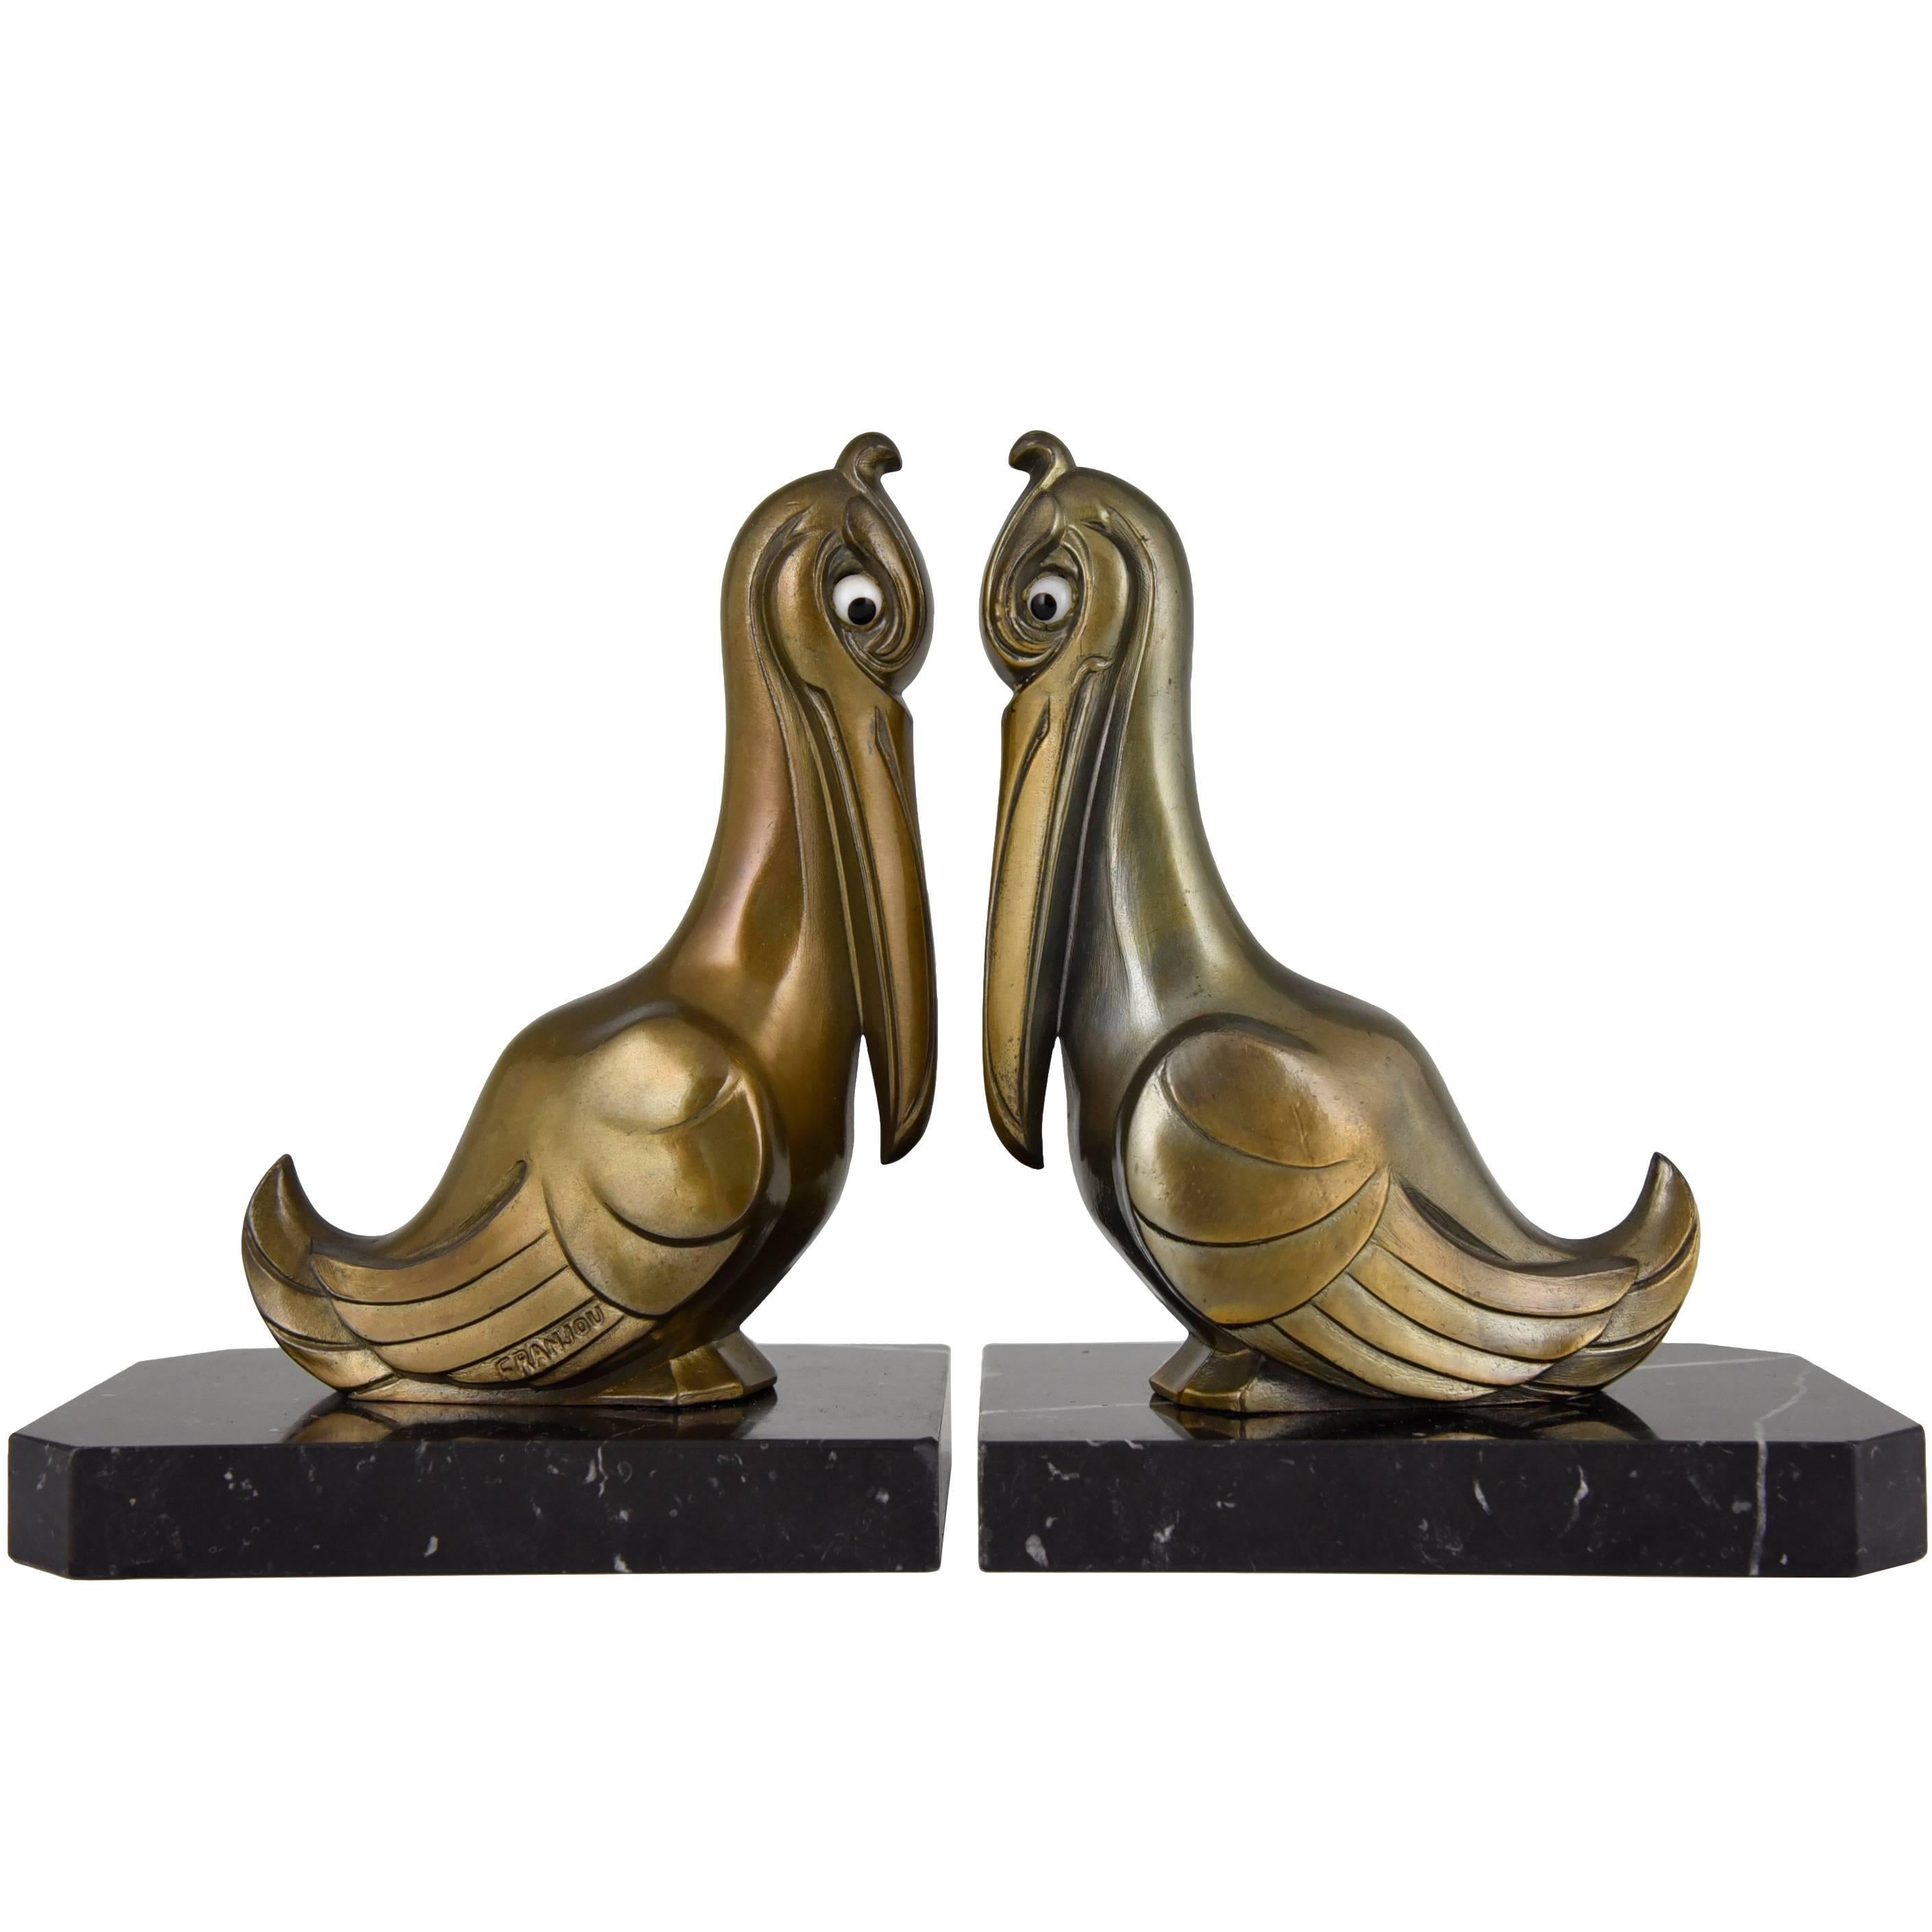 French Art Deco Pelican Bookends by Franjou, 1930